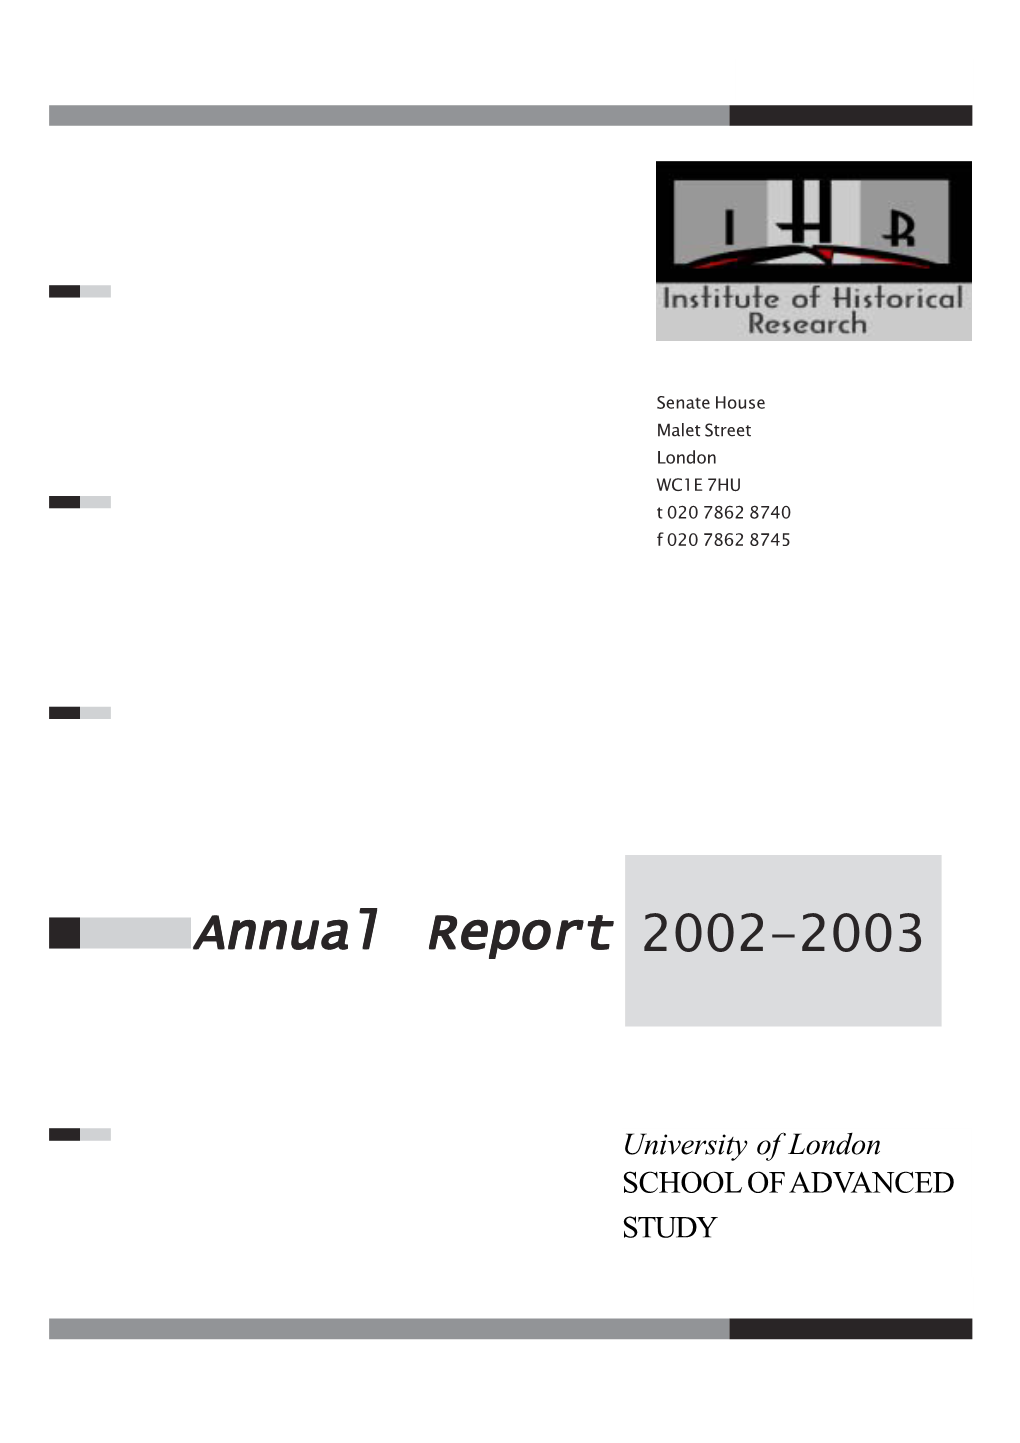 Annual Report 2002-03 Final Version 050304 Second